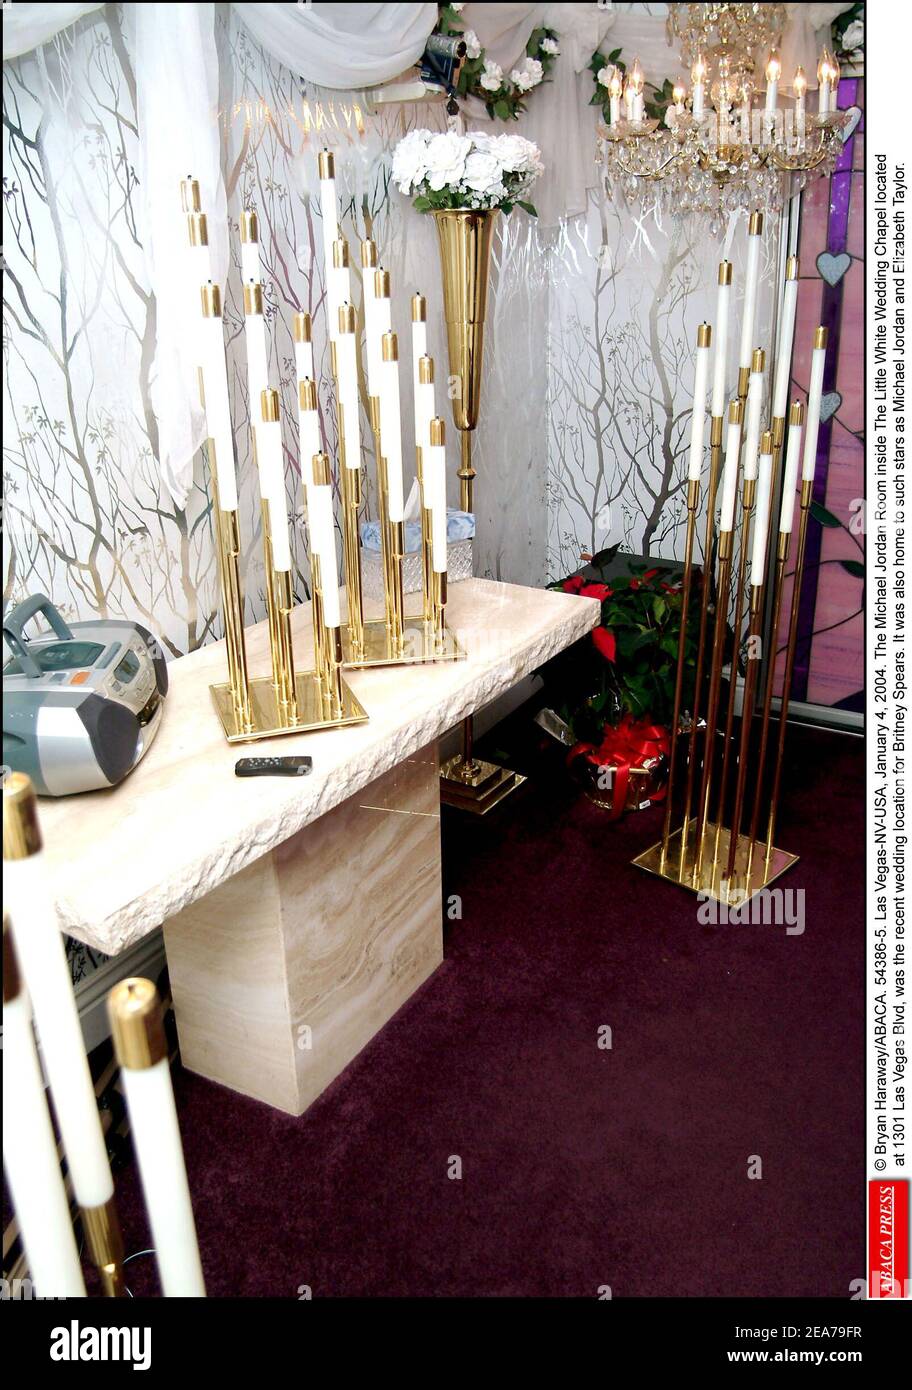 © Bryan Haraway/ABACA. 54386-5. Las Vegas-NV-USA, January 4, 2004. The Michael Jordan Room inside The Little White Wedding Chapel located at 1301 Las Vegas Blvd, was the recent wedding location for Britney Spears. It was also home to such stars as Michael Jordan and Elizabeth Taylor. Stock Photo